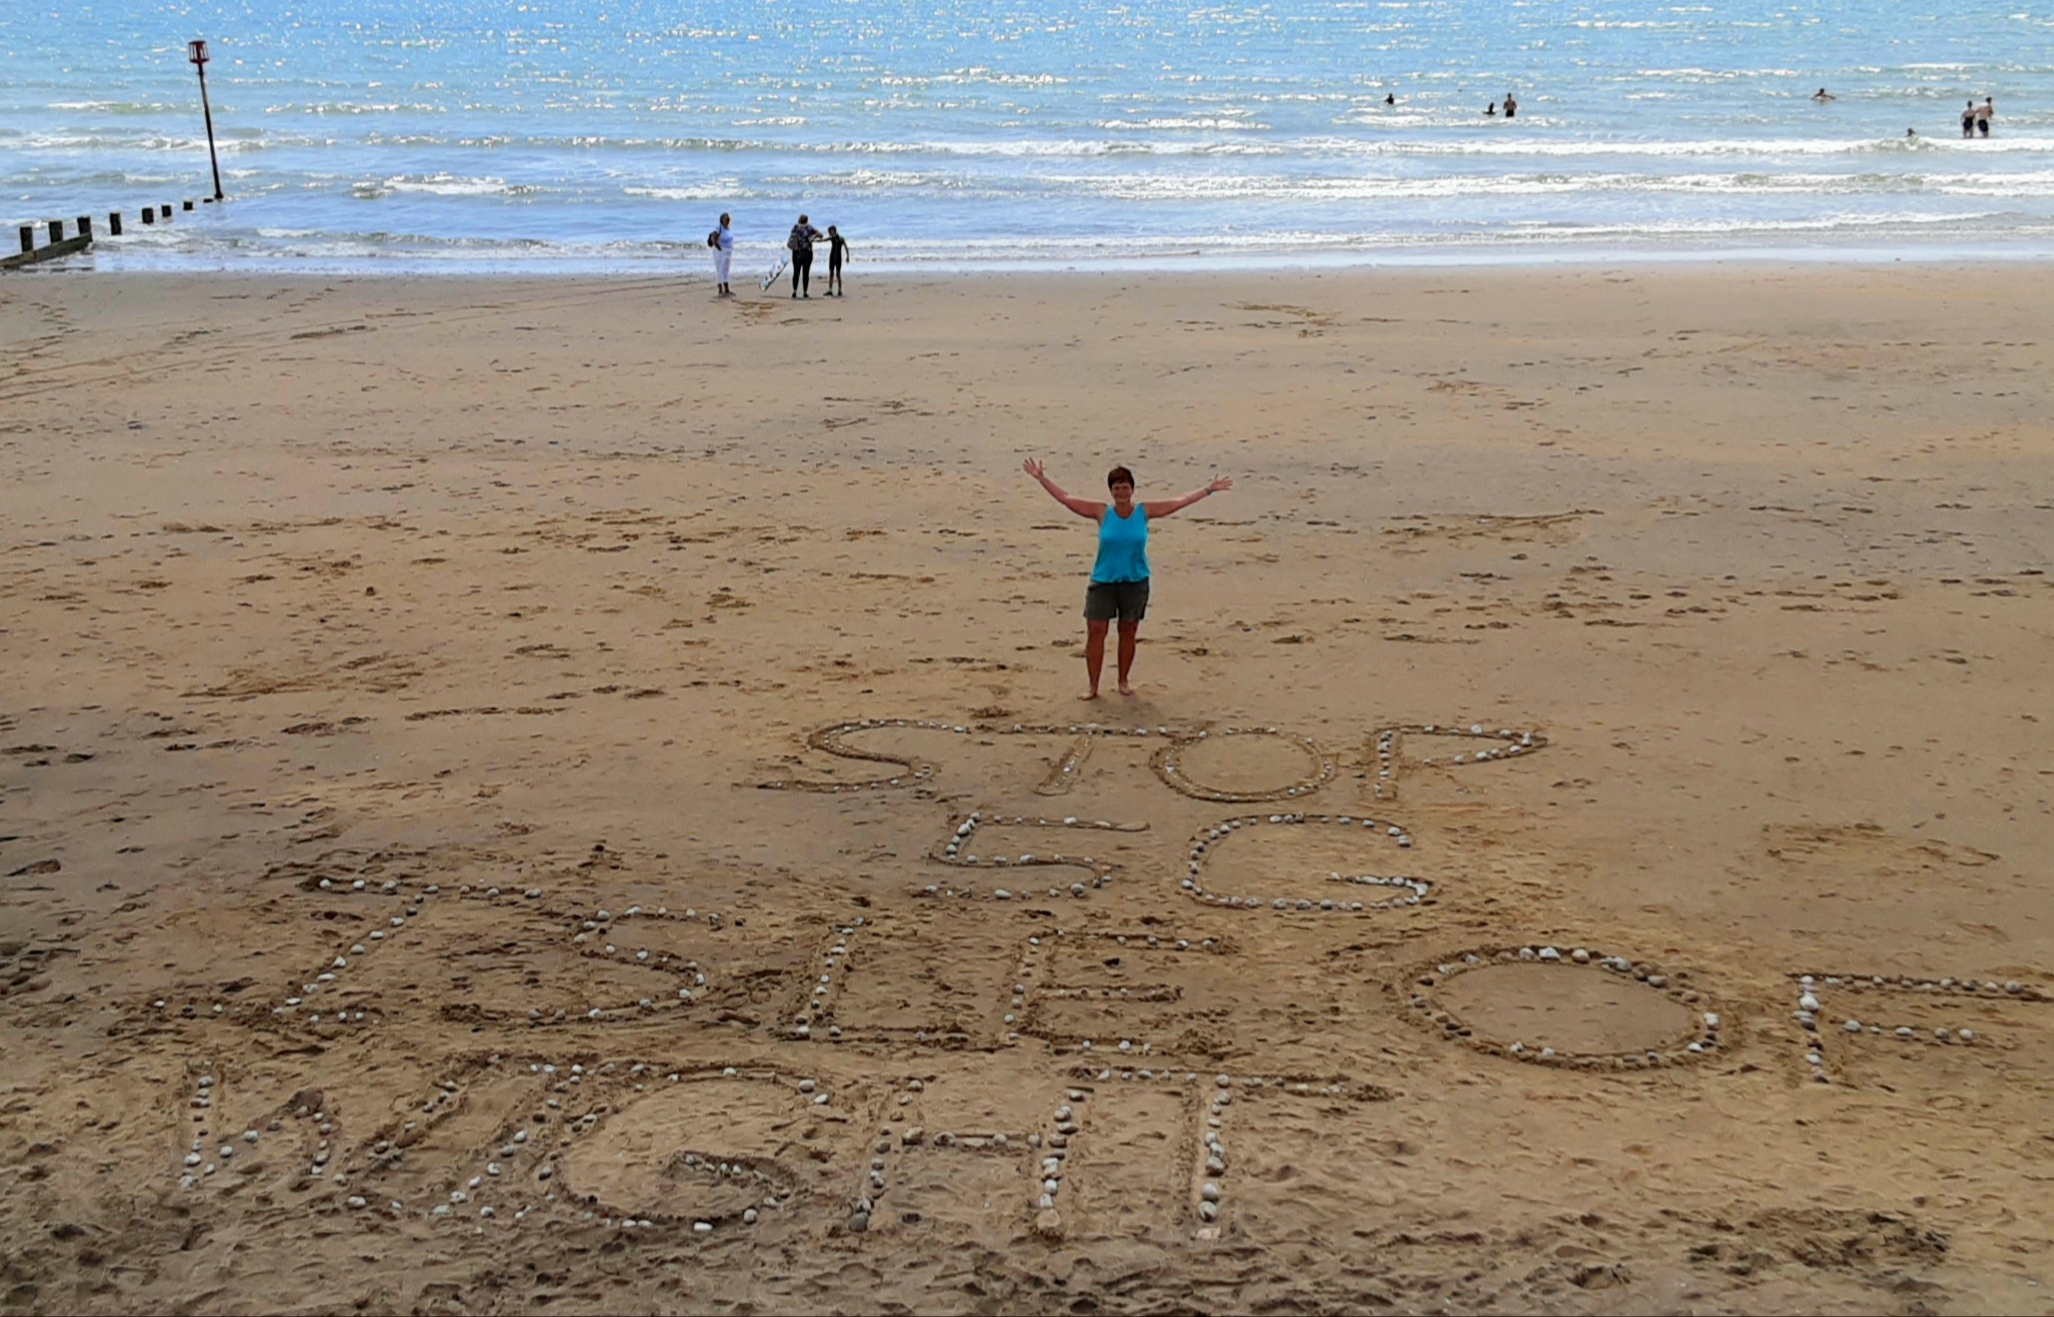 Stop 5G Global Beach Action, Yaverland, Isle of Wight